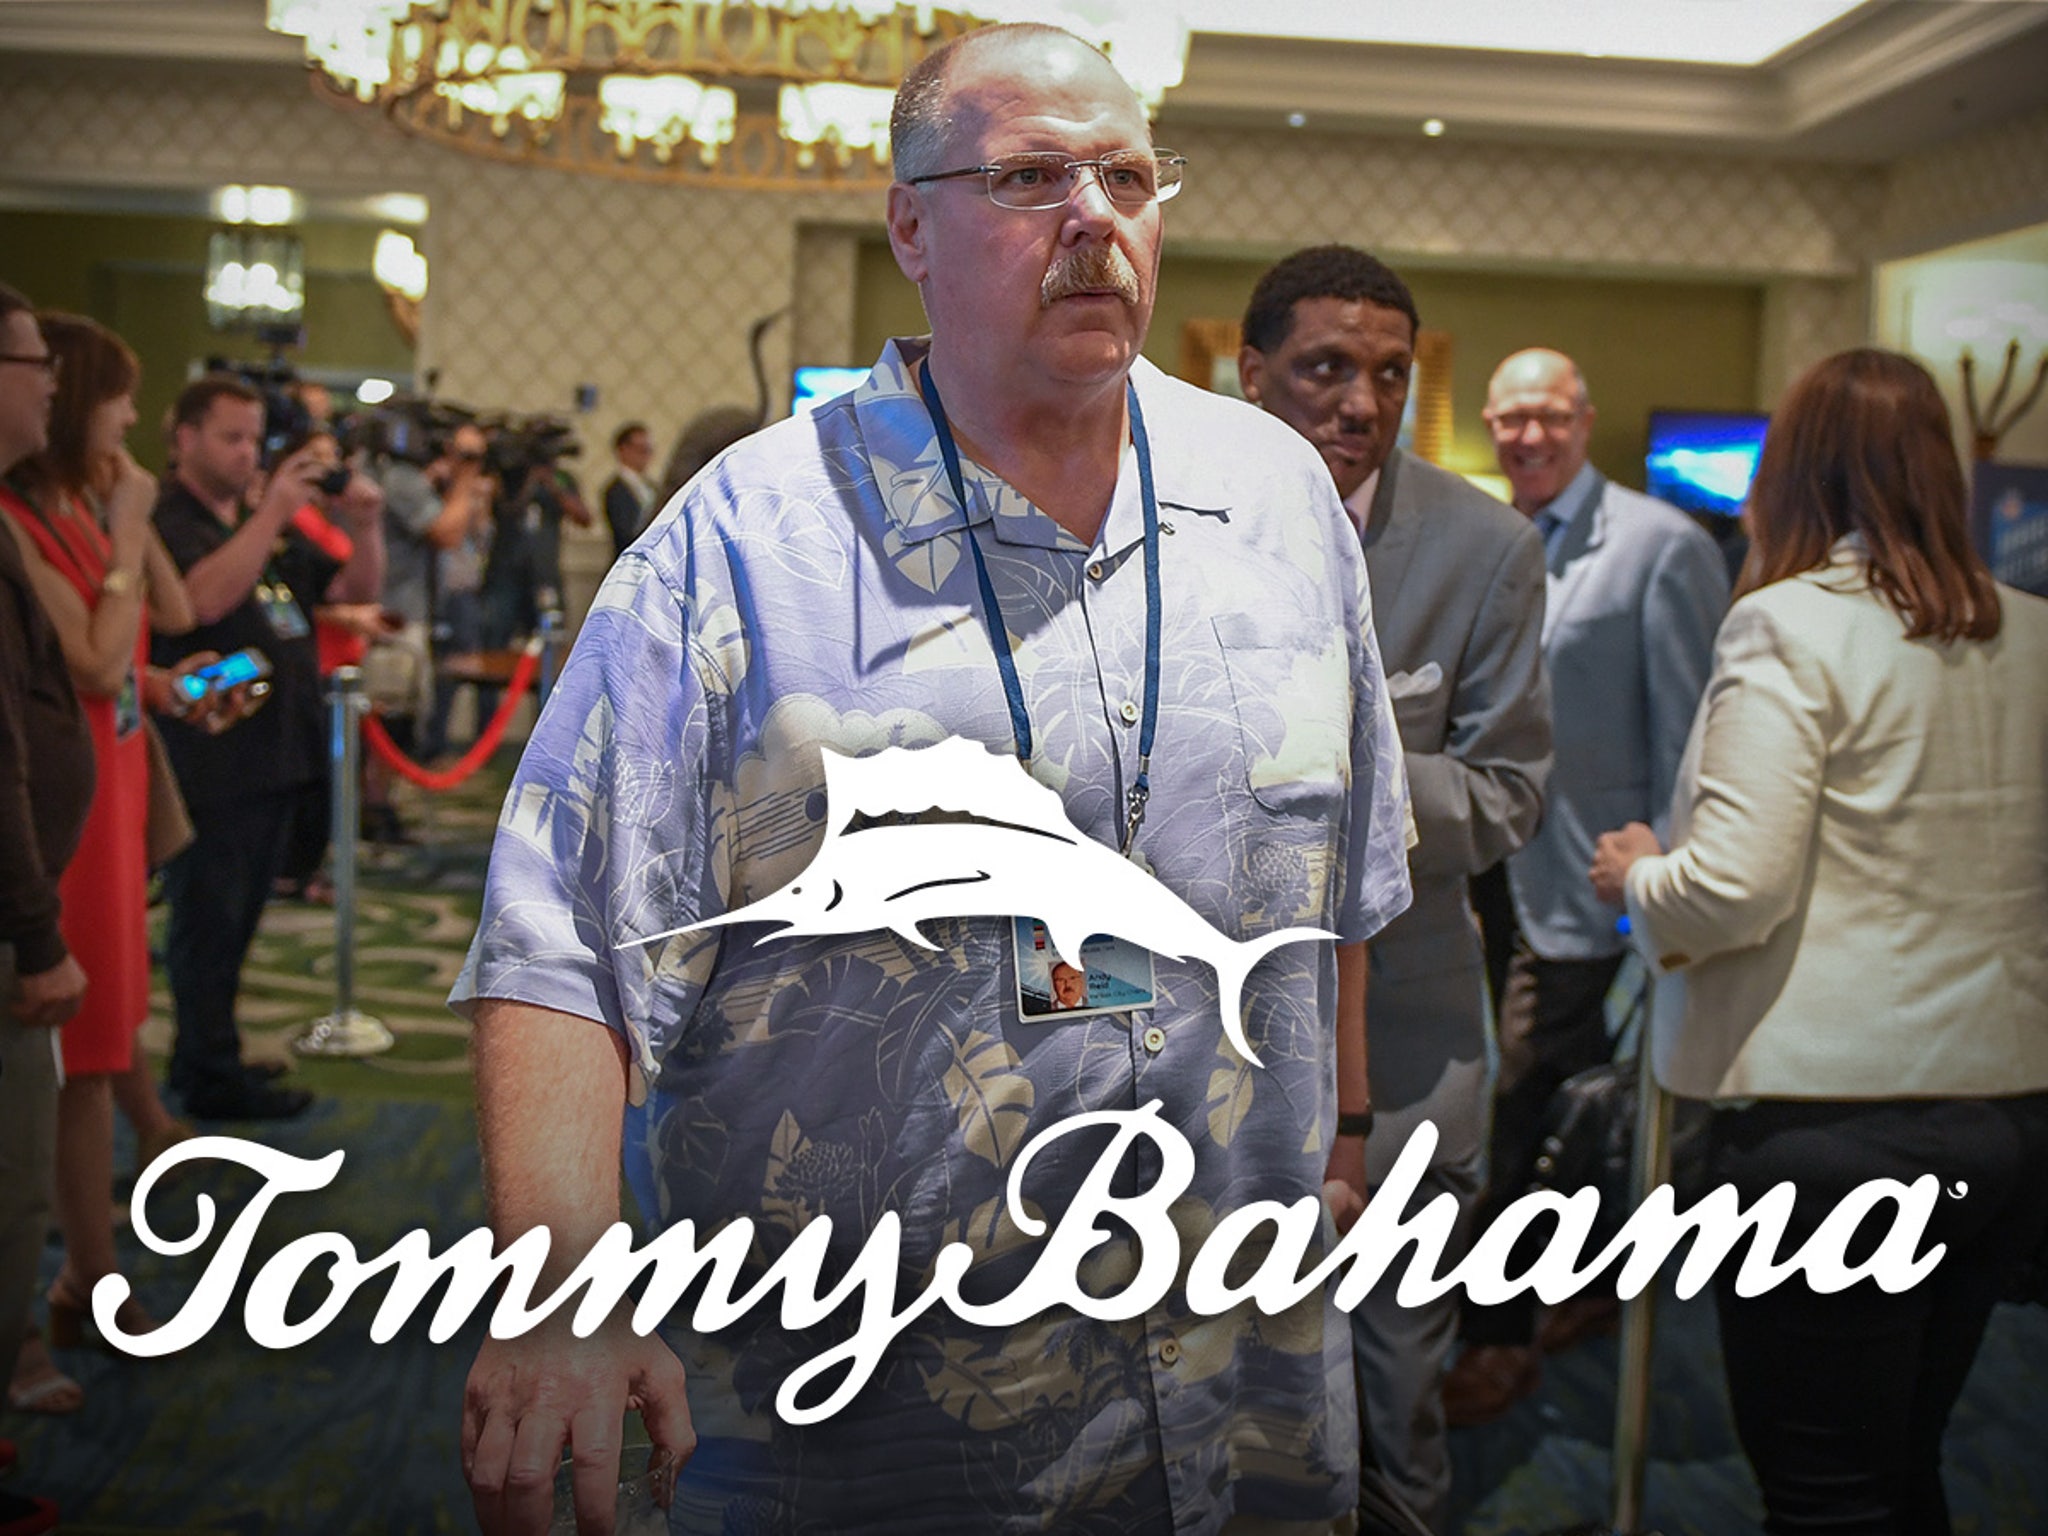 Andy Reid Is Tommy Bahama's Most Important Male Model, Sales Skyrocket!